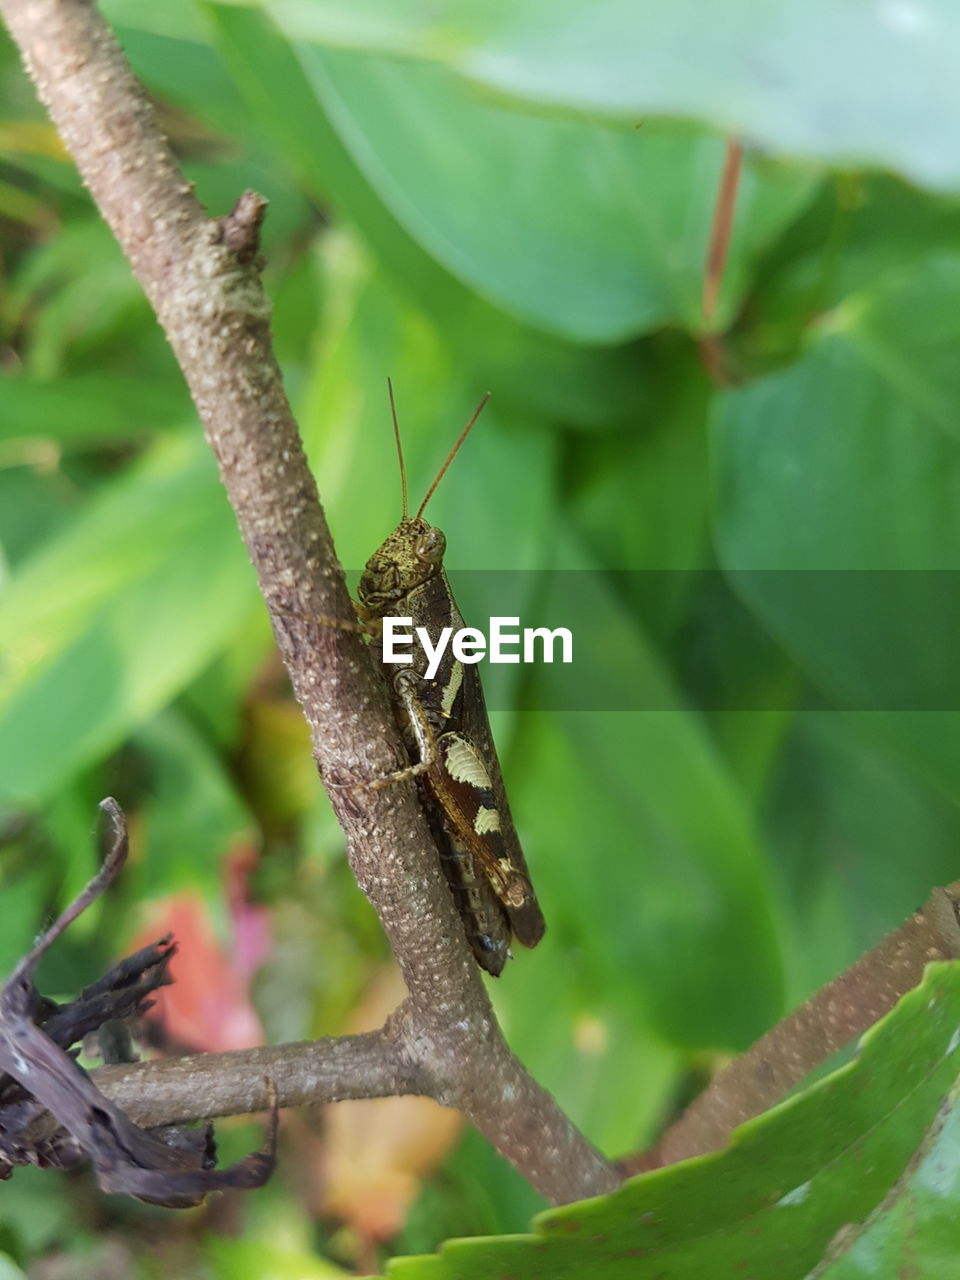 CLOSE-UP OF GRASSHOPPER ON PLANT